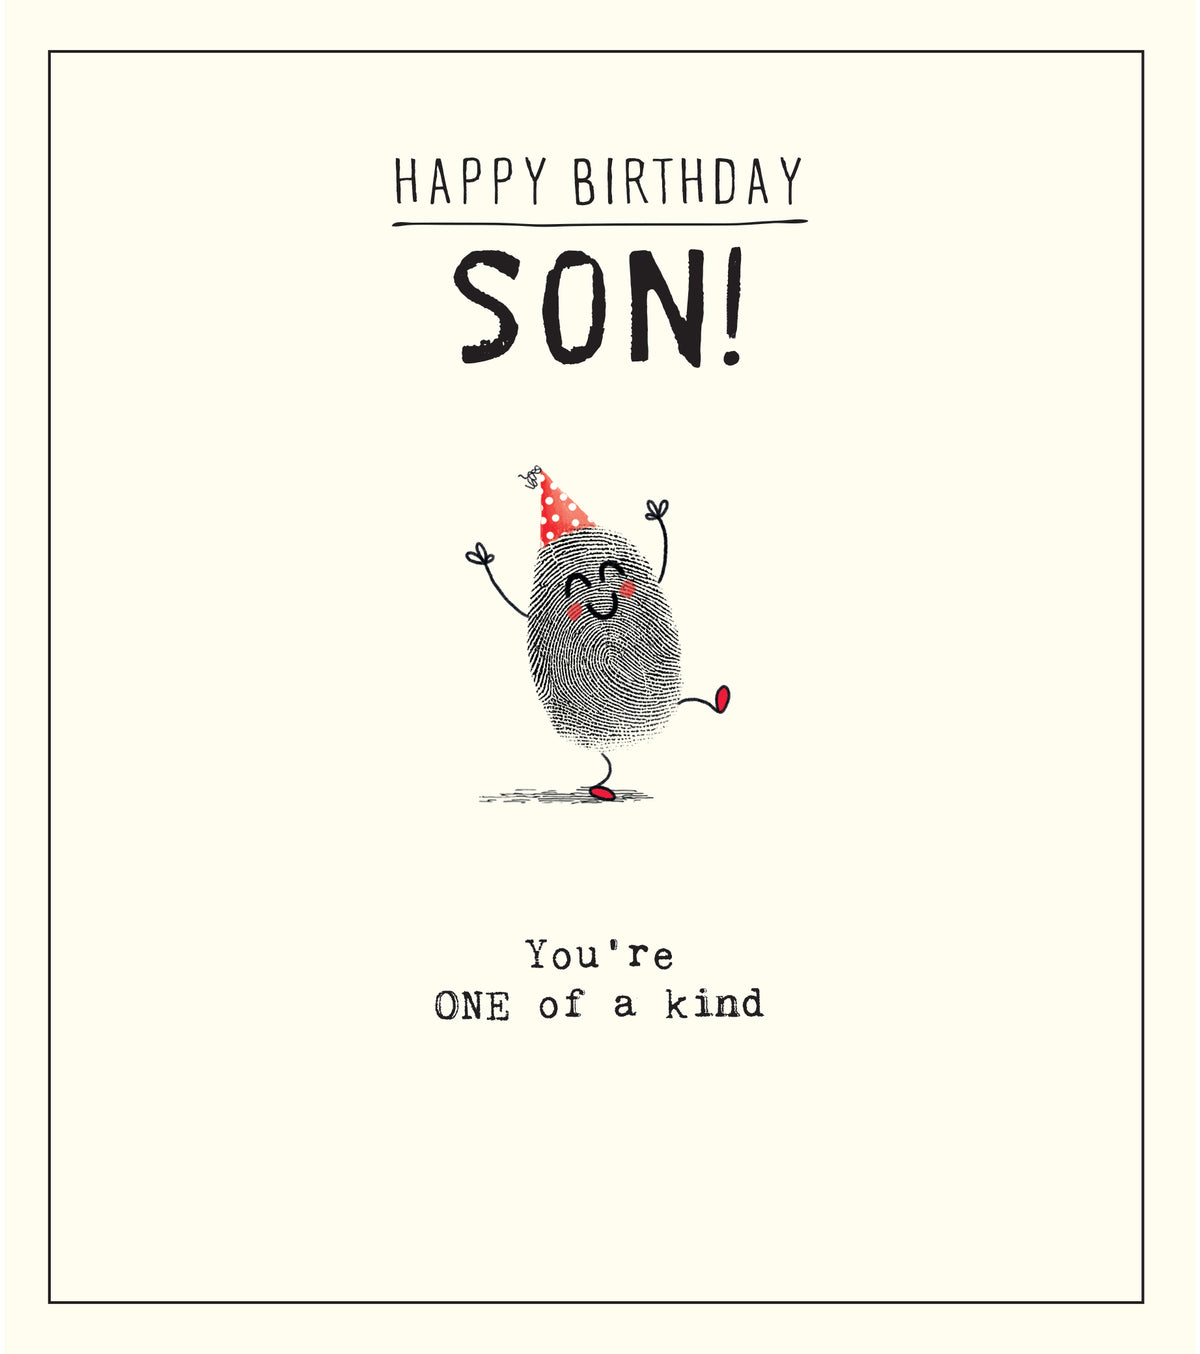 Son Fingerprint One Of A Kind Birthday Card from Penny Black